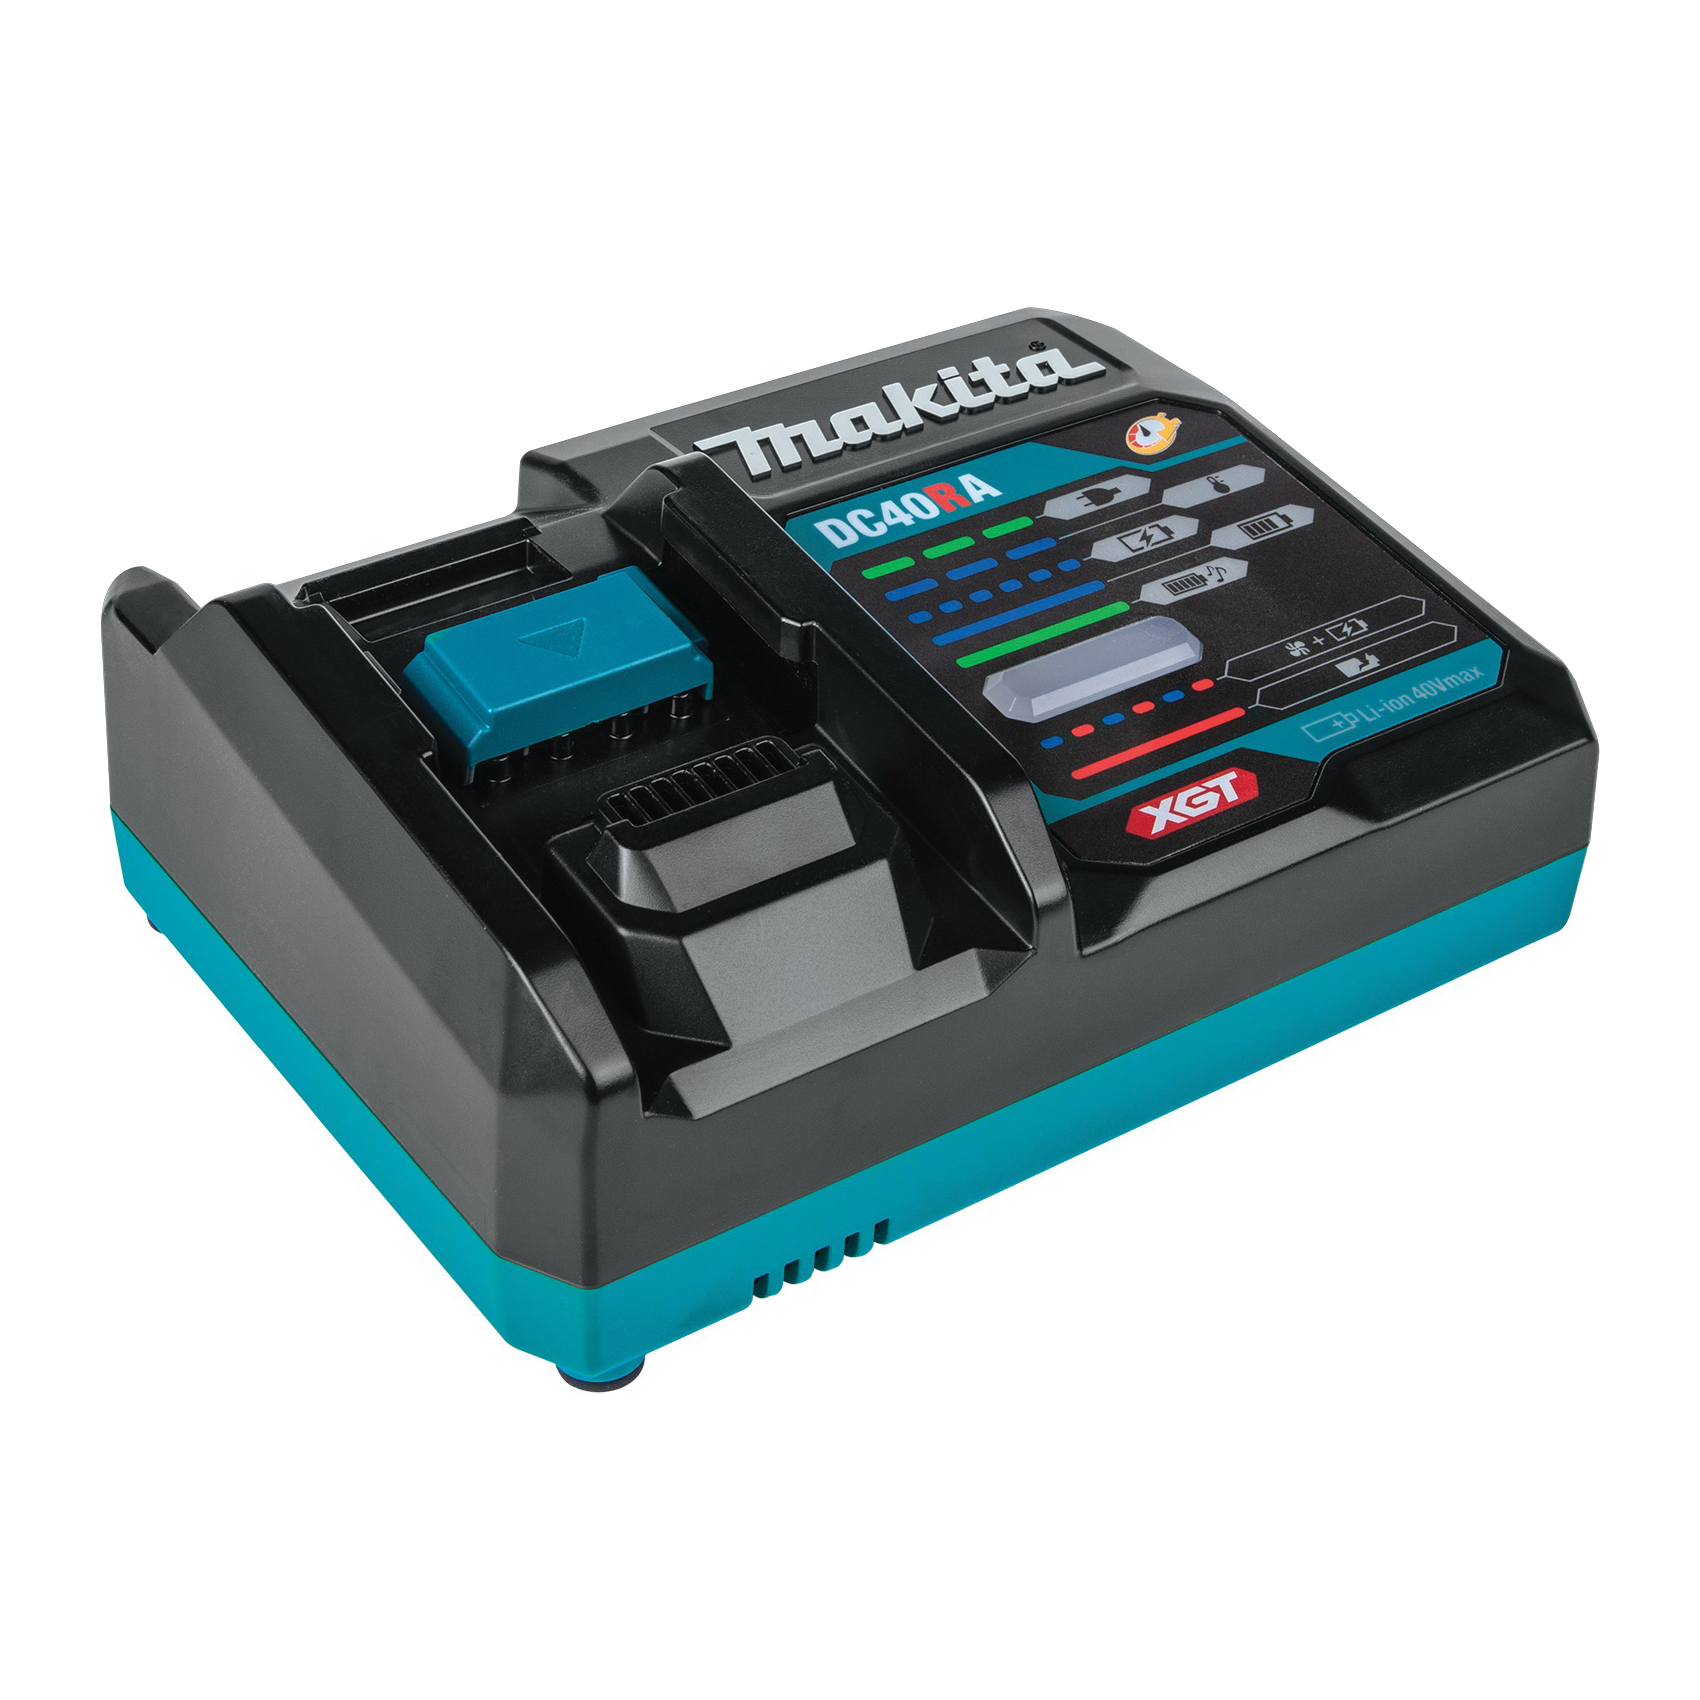 Makita XGT GDT01D Impact Driver Kit, Battery Included, 40 V, 2.5 Ah, 1/4 in Drive, Hex Drive - 3